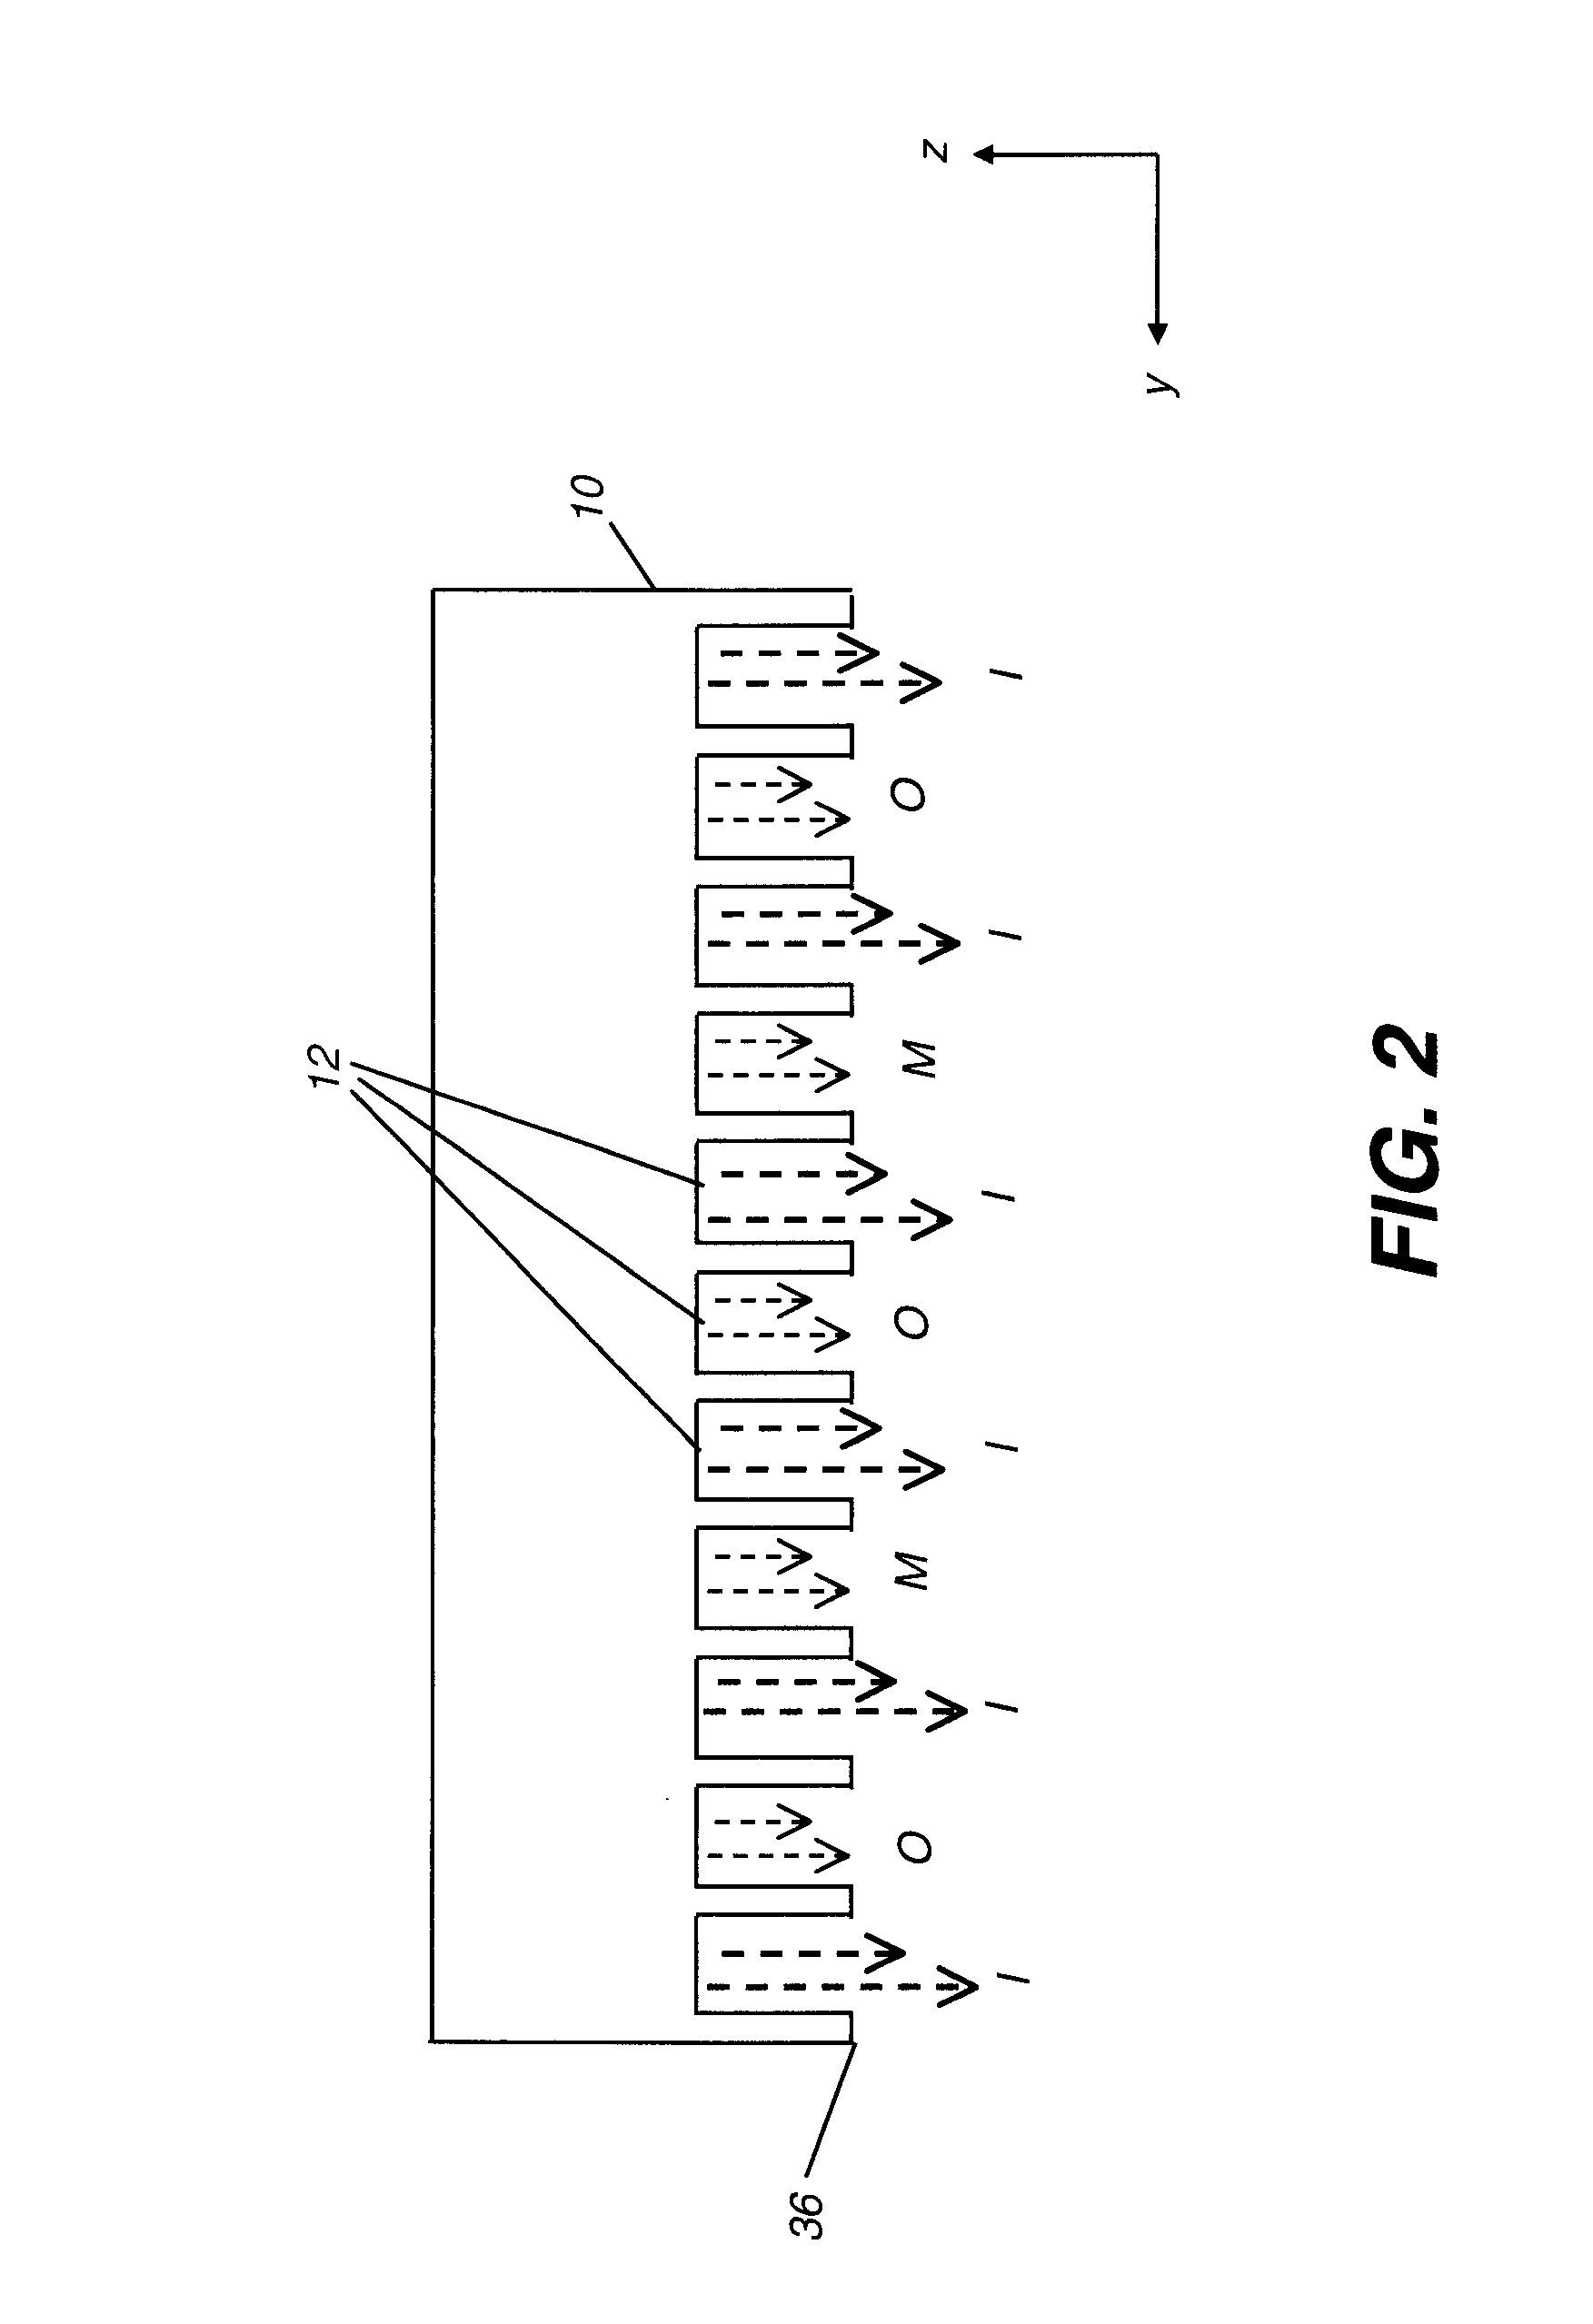 Delivery device for deposition